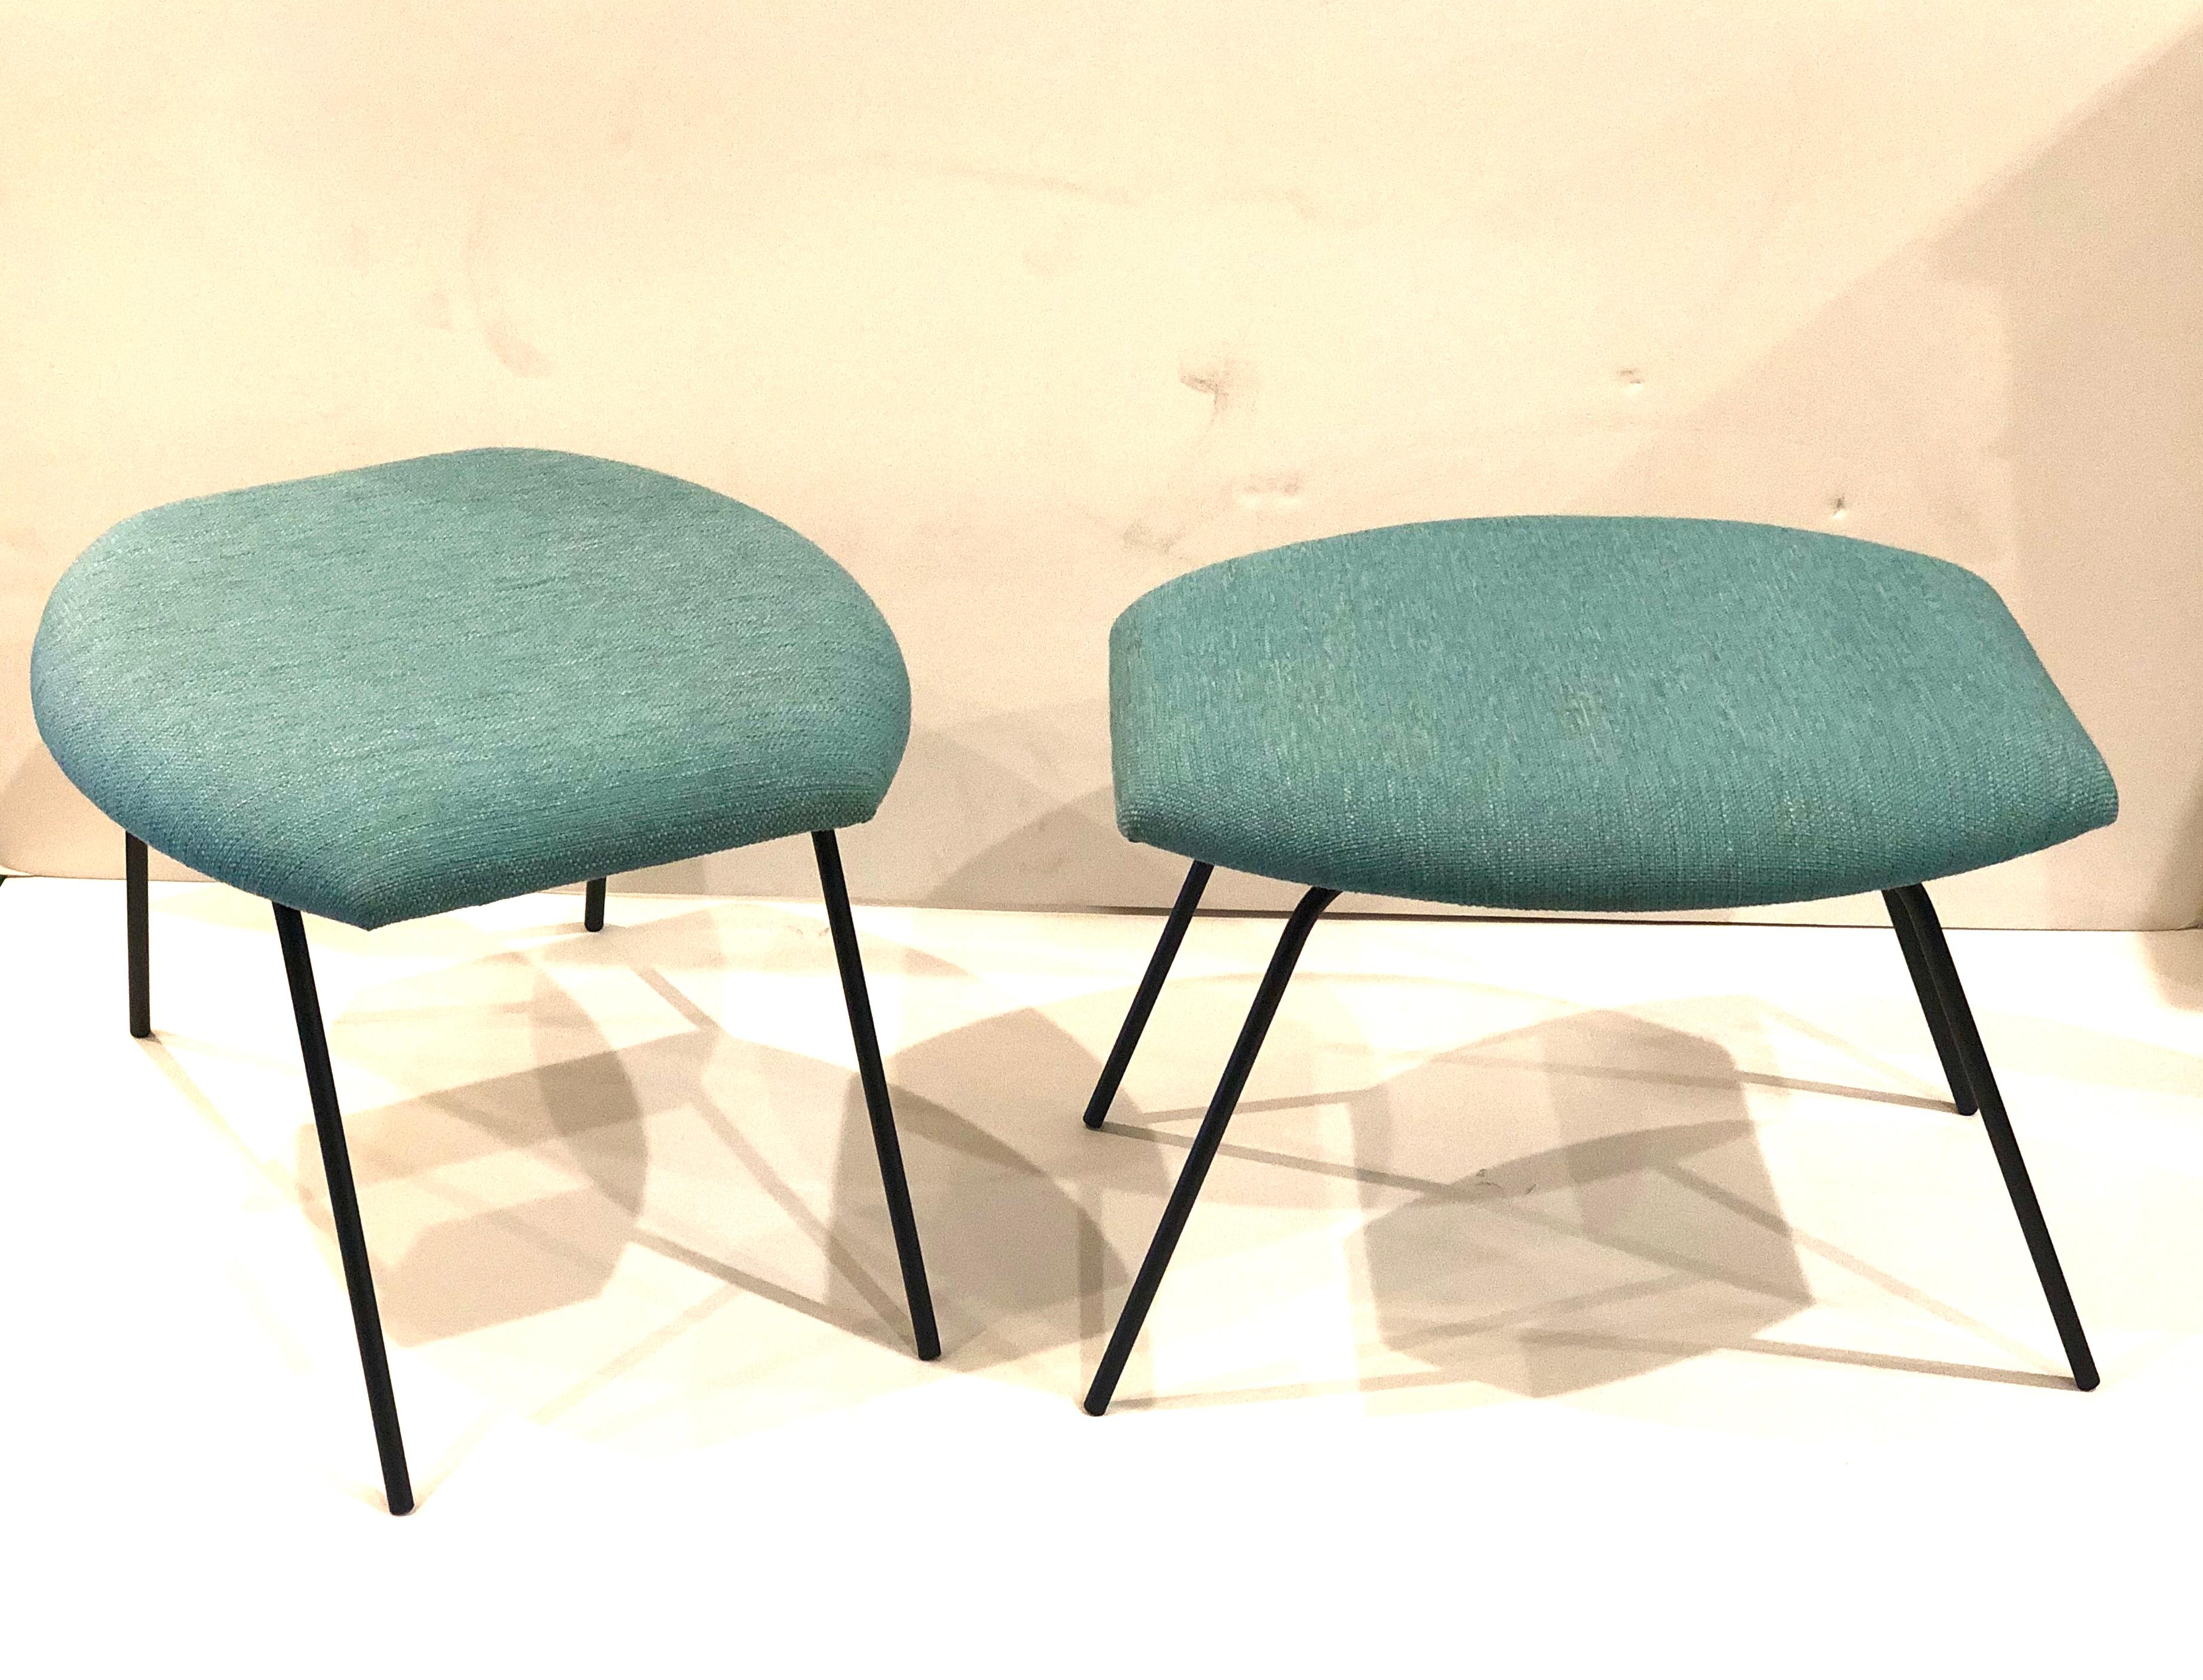 Nice pair of freshly upholstered ottomans, solid iron pipping legs with nice turquoise fabric freshly upholstered and the base its resprayed in flat black.